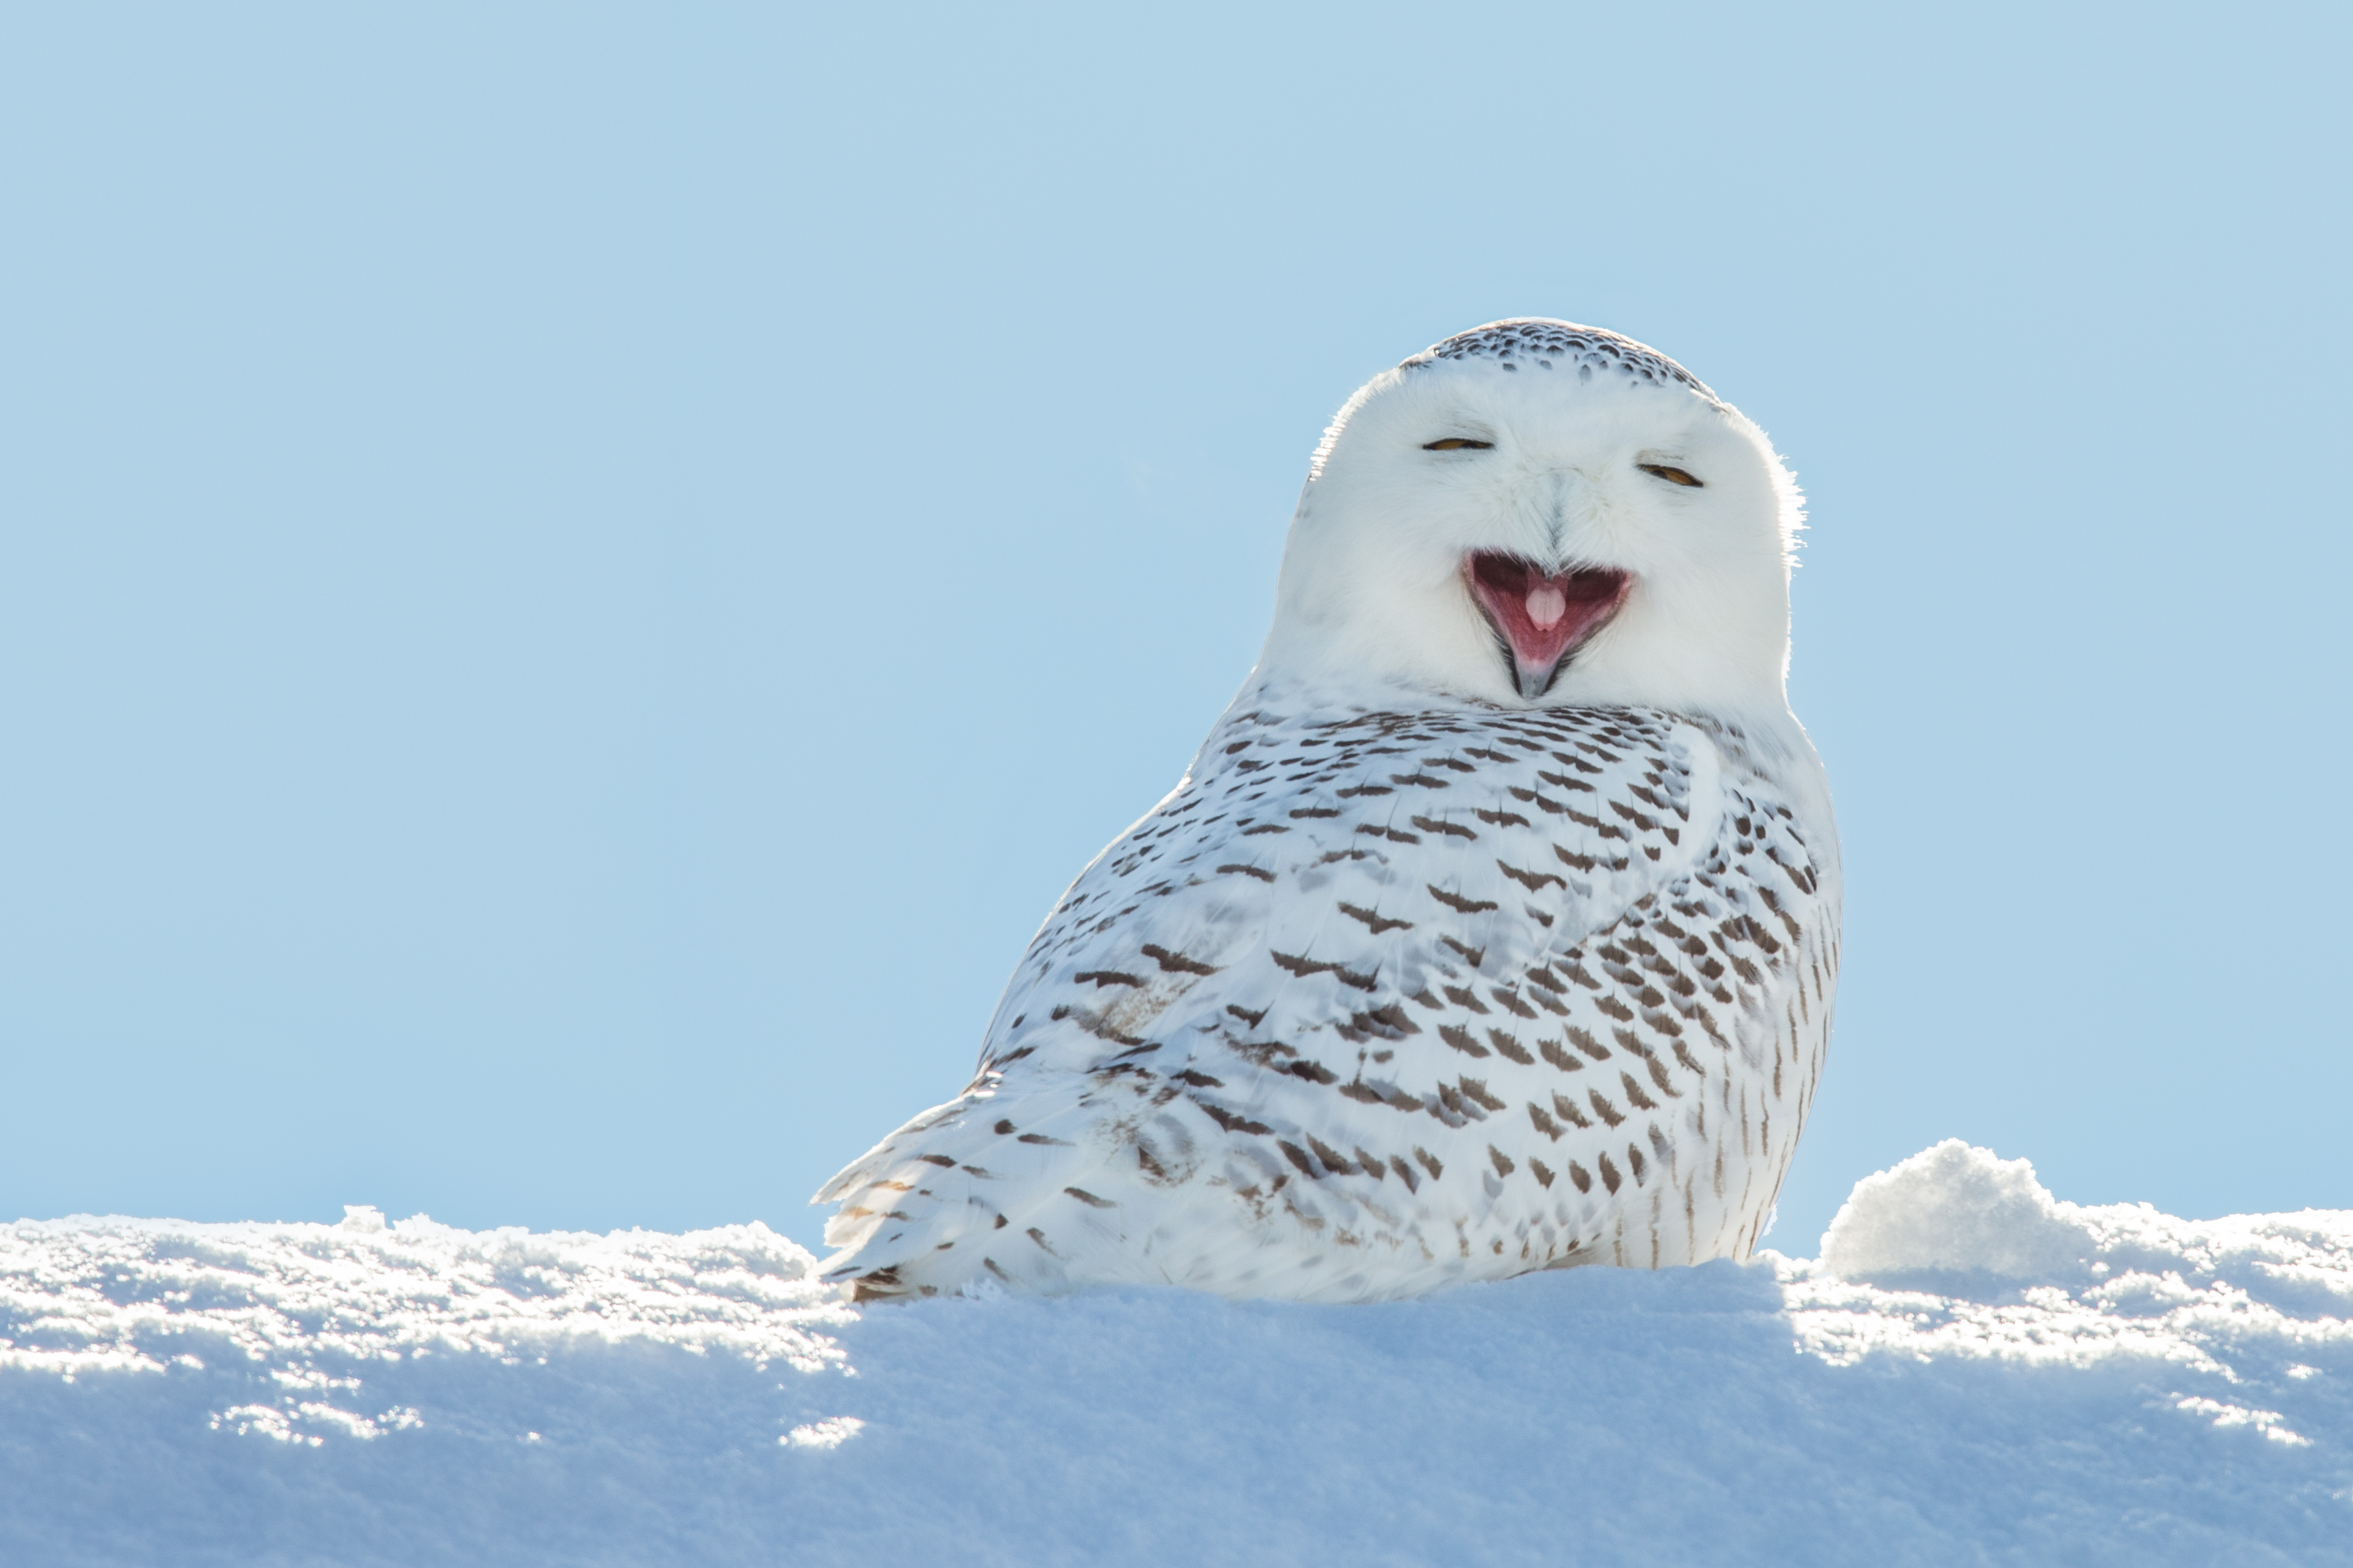 A snowy owl appears to be smiling with closed eyes, perched on snow against a clear sky backdrop